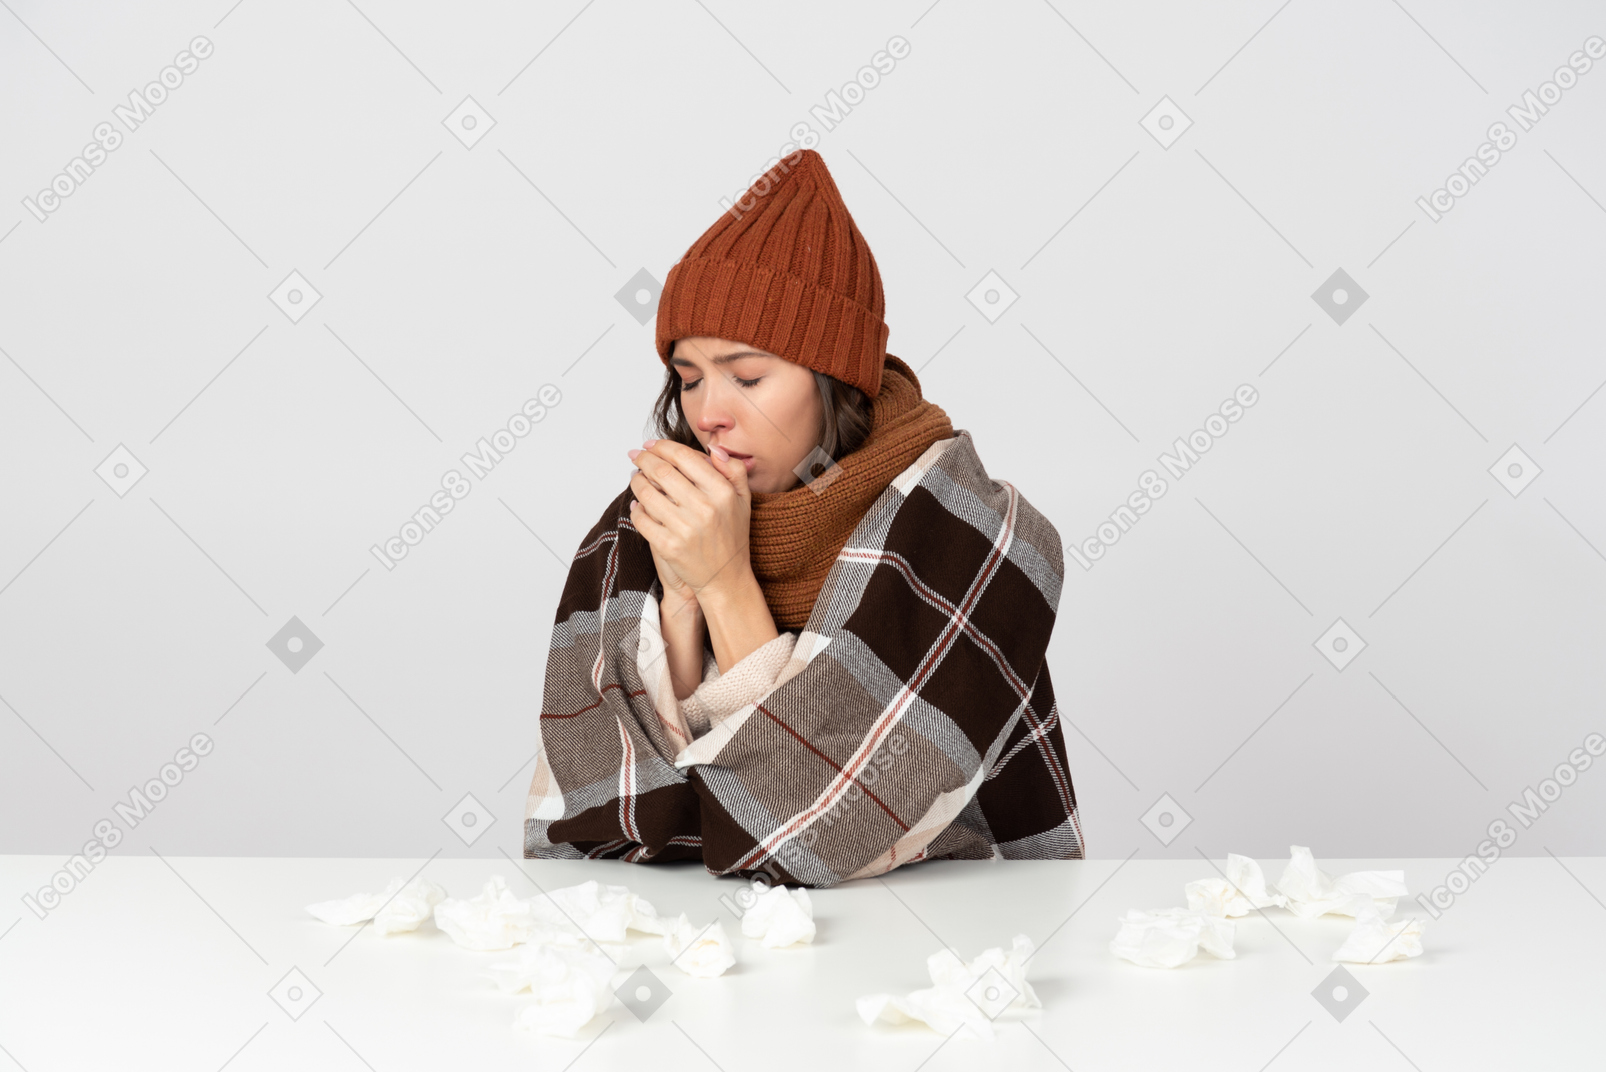 Catching a cold is the worst thing that could happen to me